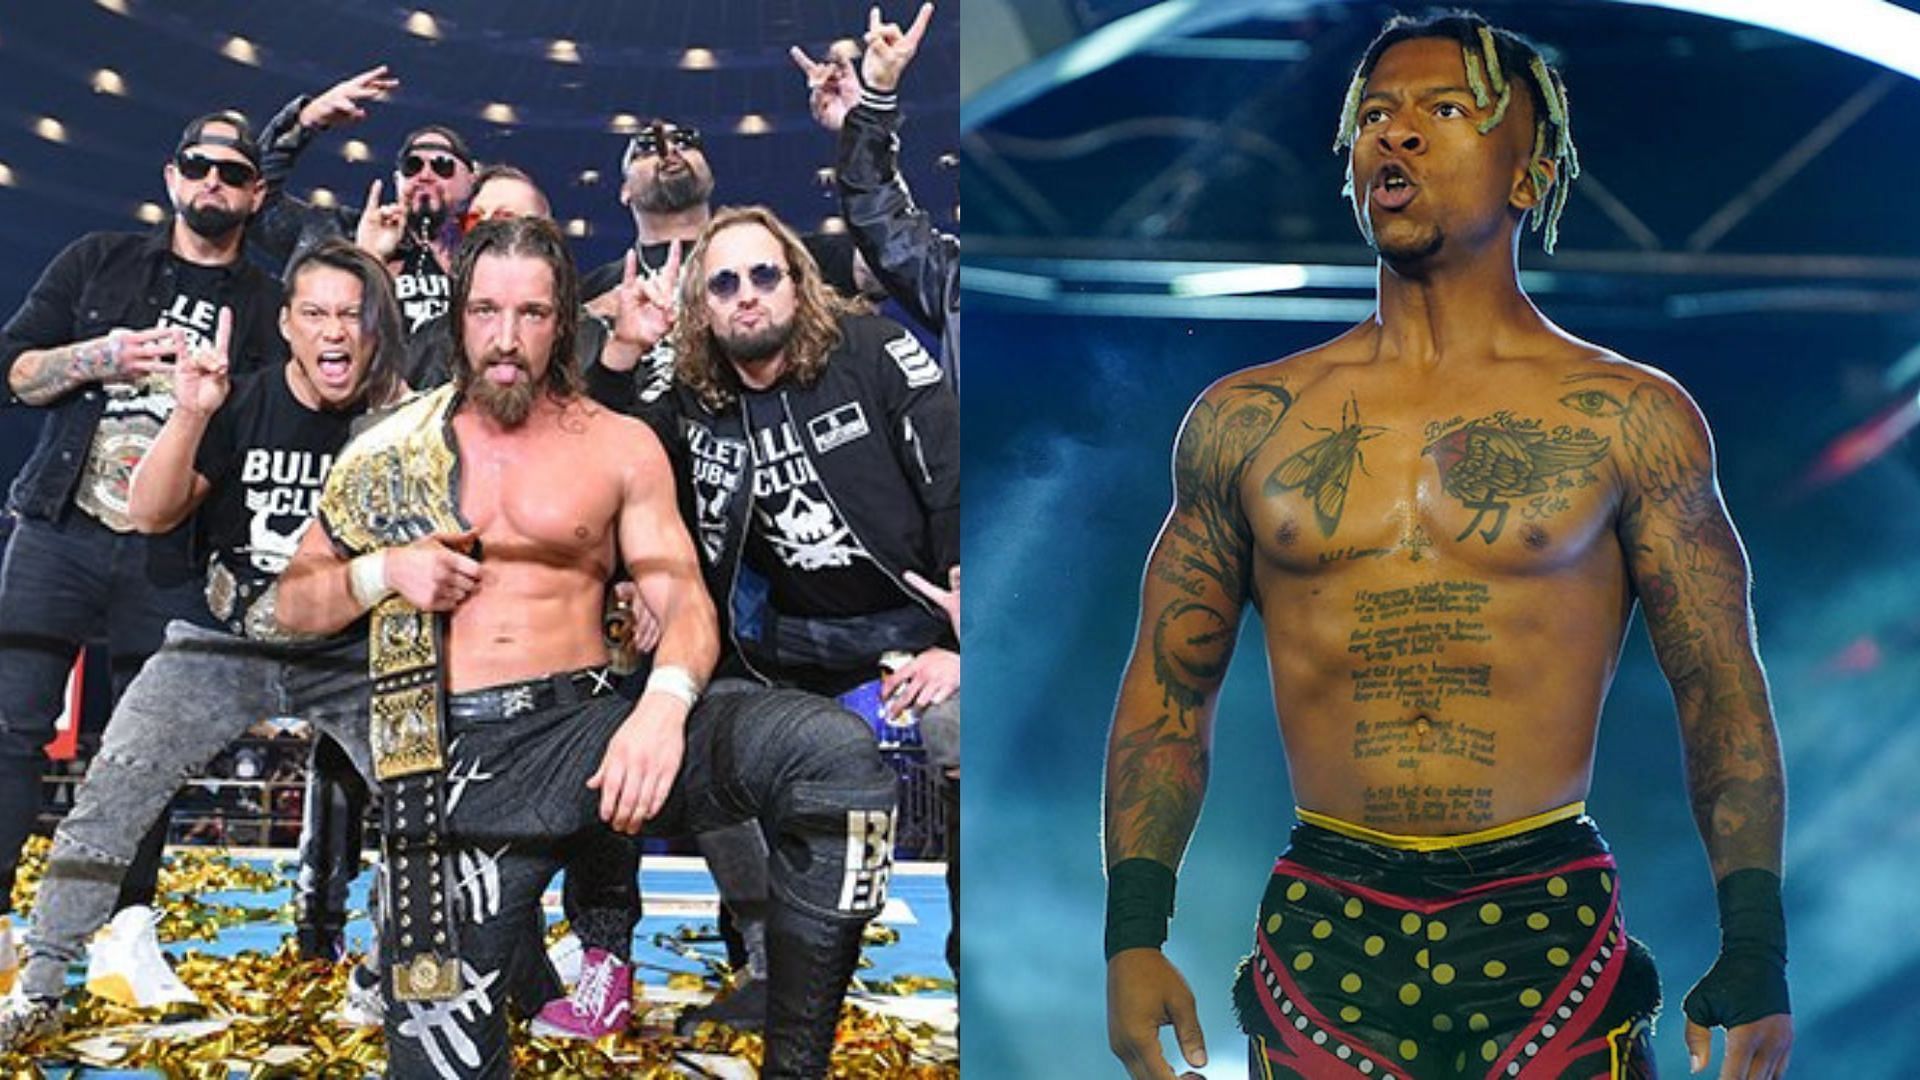 Lio Rush (right) will be in action at Wrestle Kingdom 17